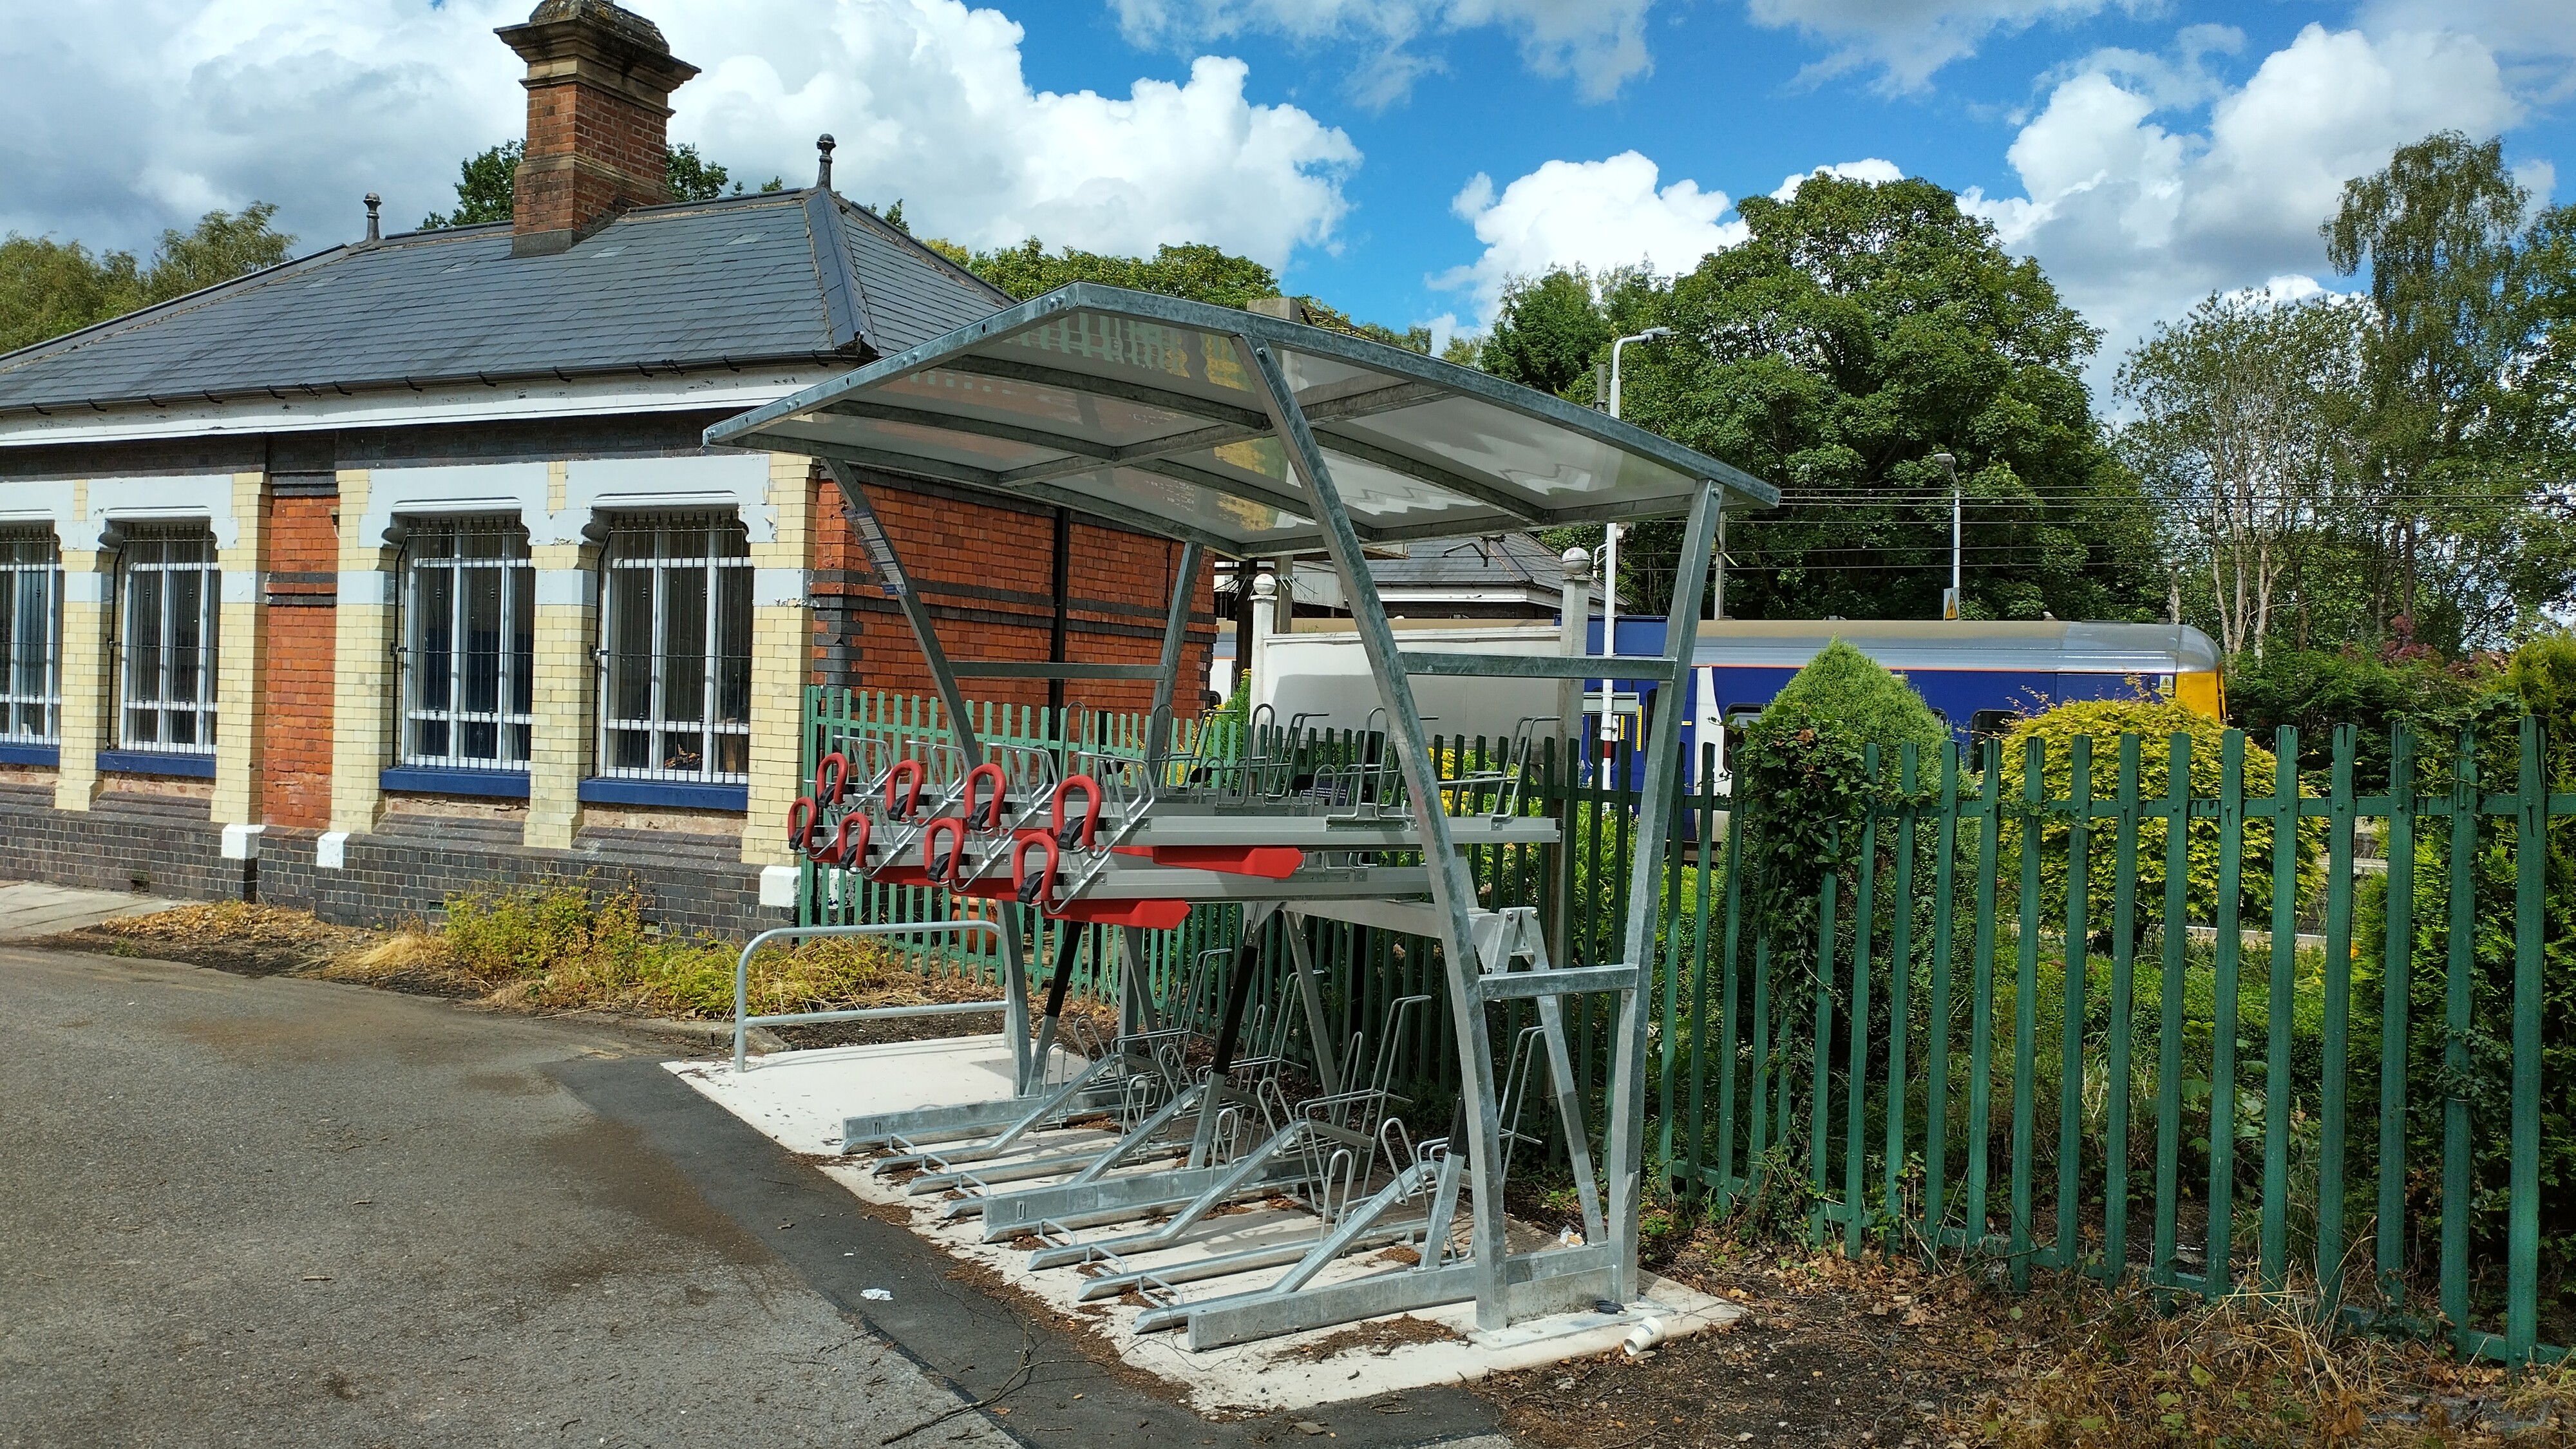 This image shows new cycle parking at Poyton ready for use